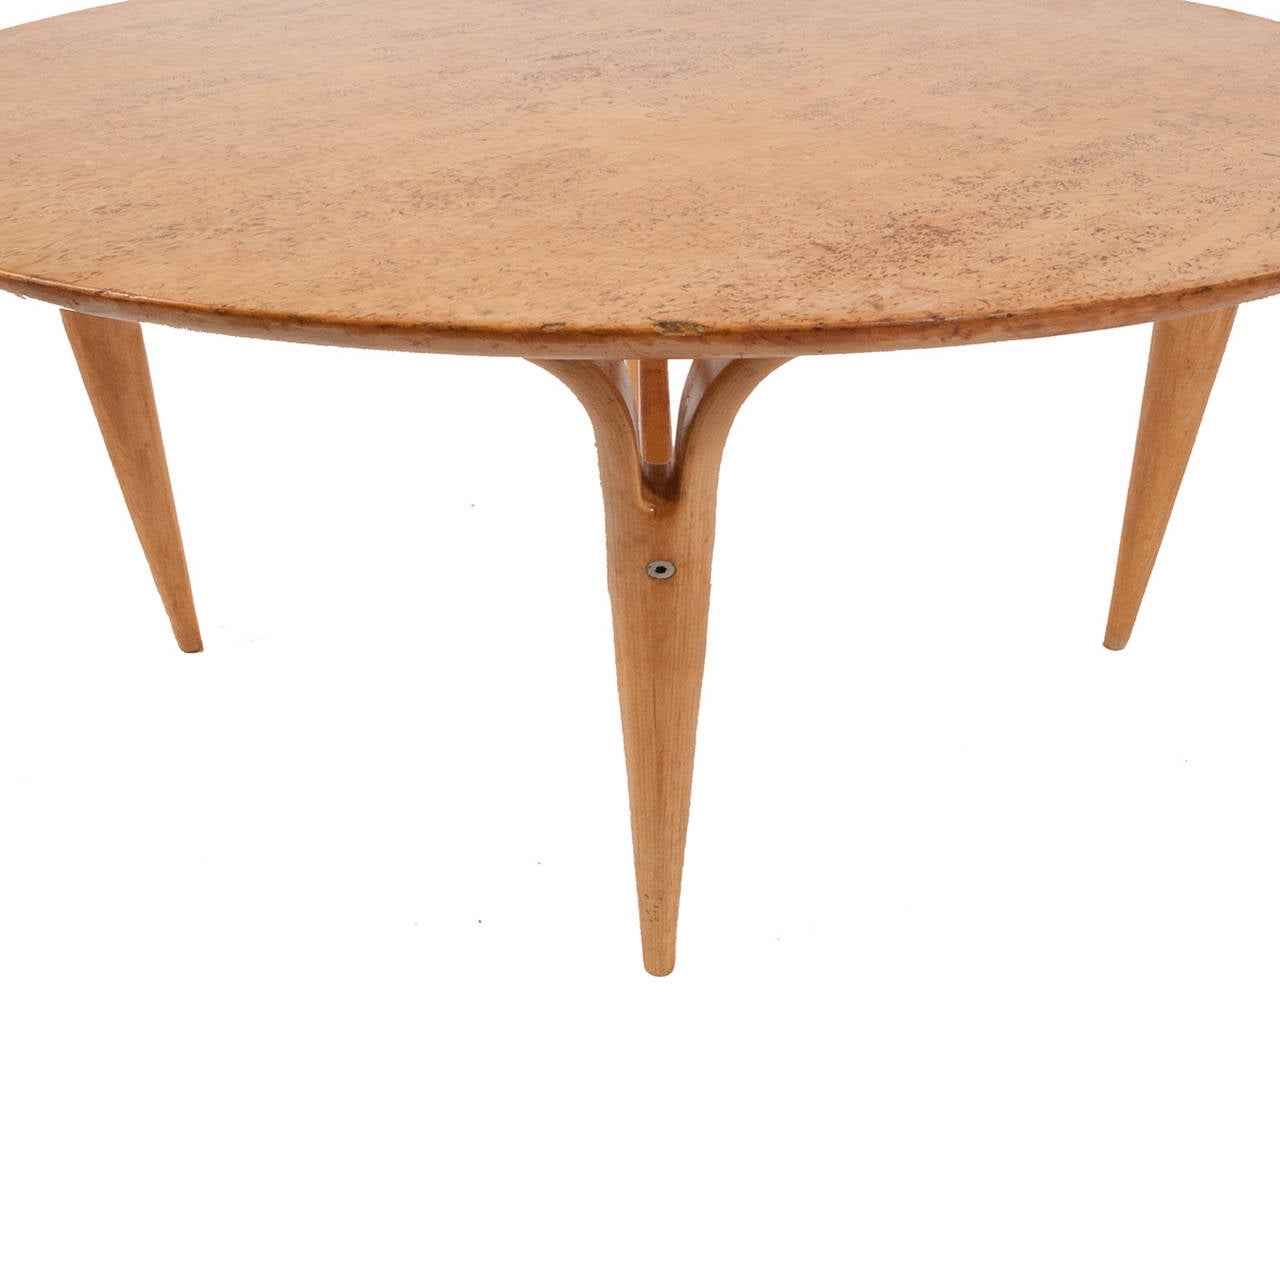 Bird's-eye maple round top on four bent beech plywood legs, signed and dated 1965, original condition.